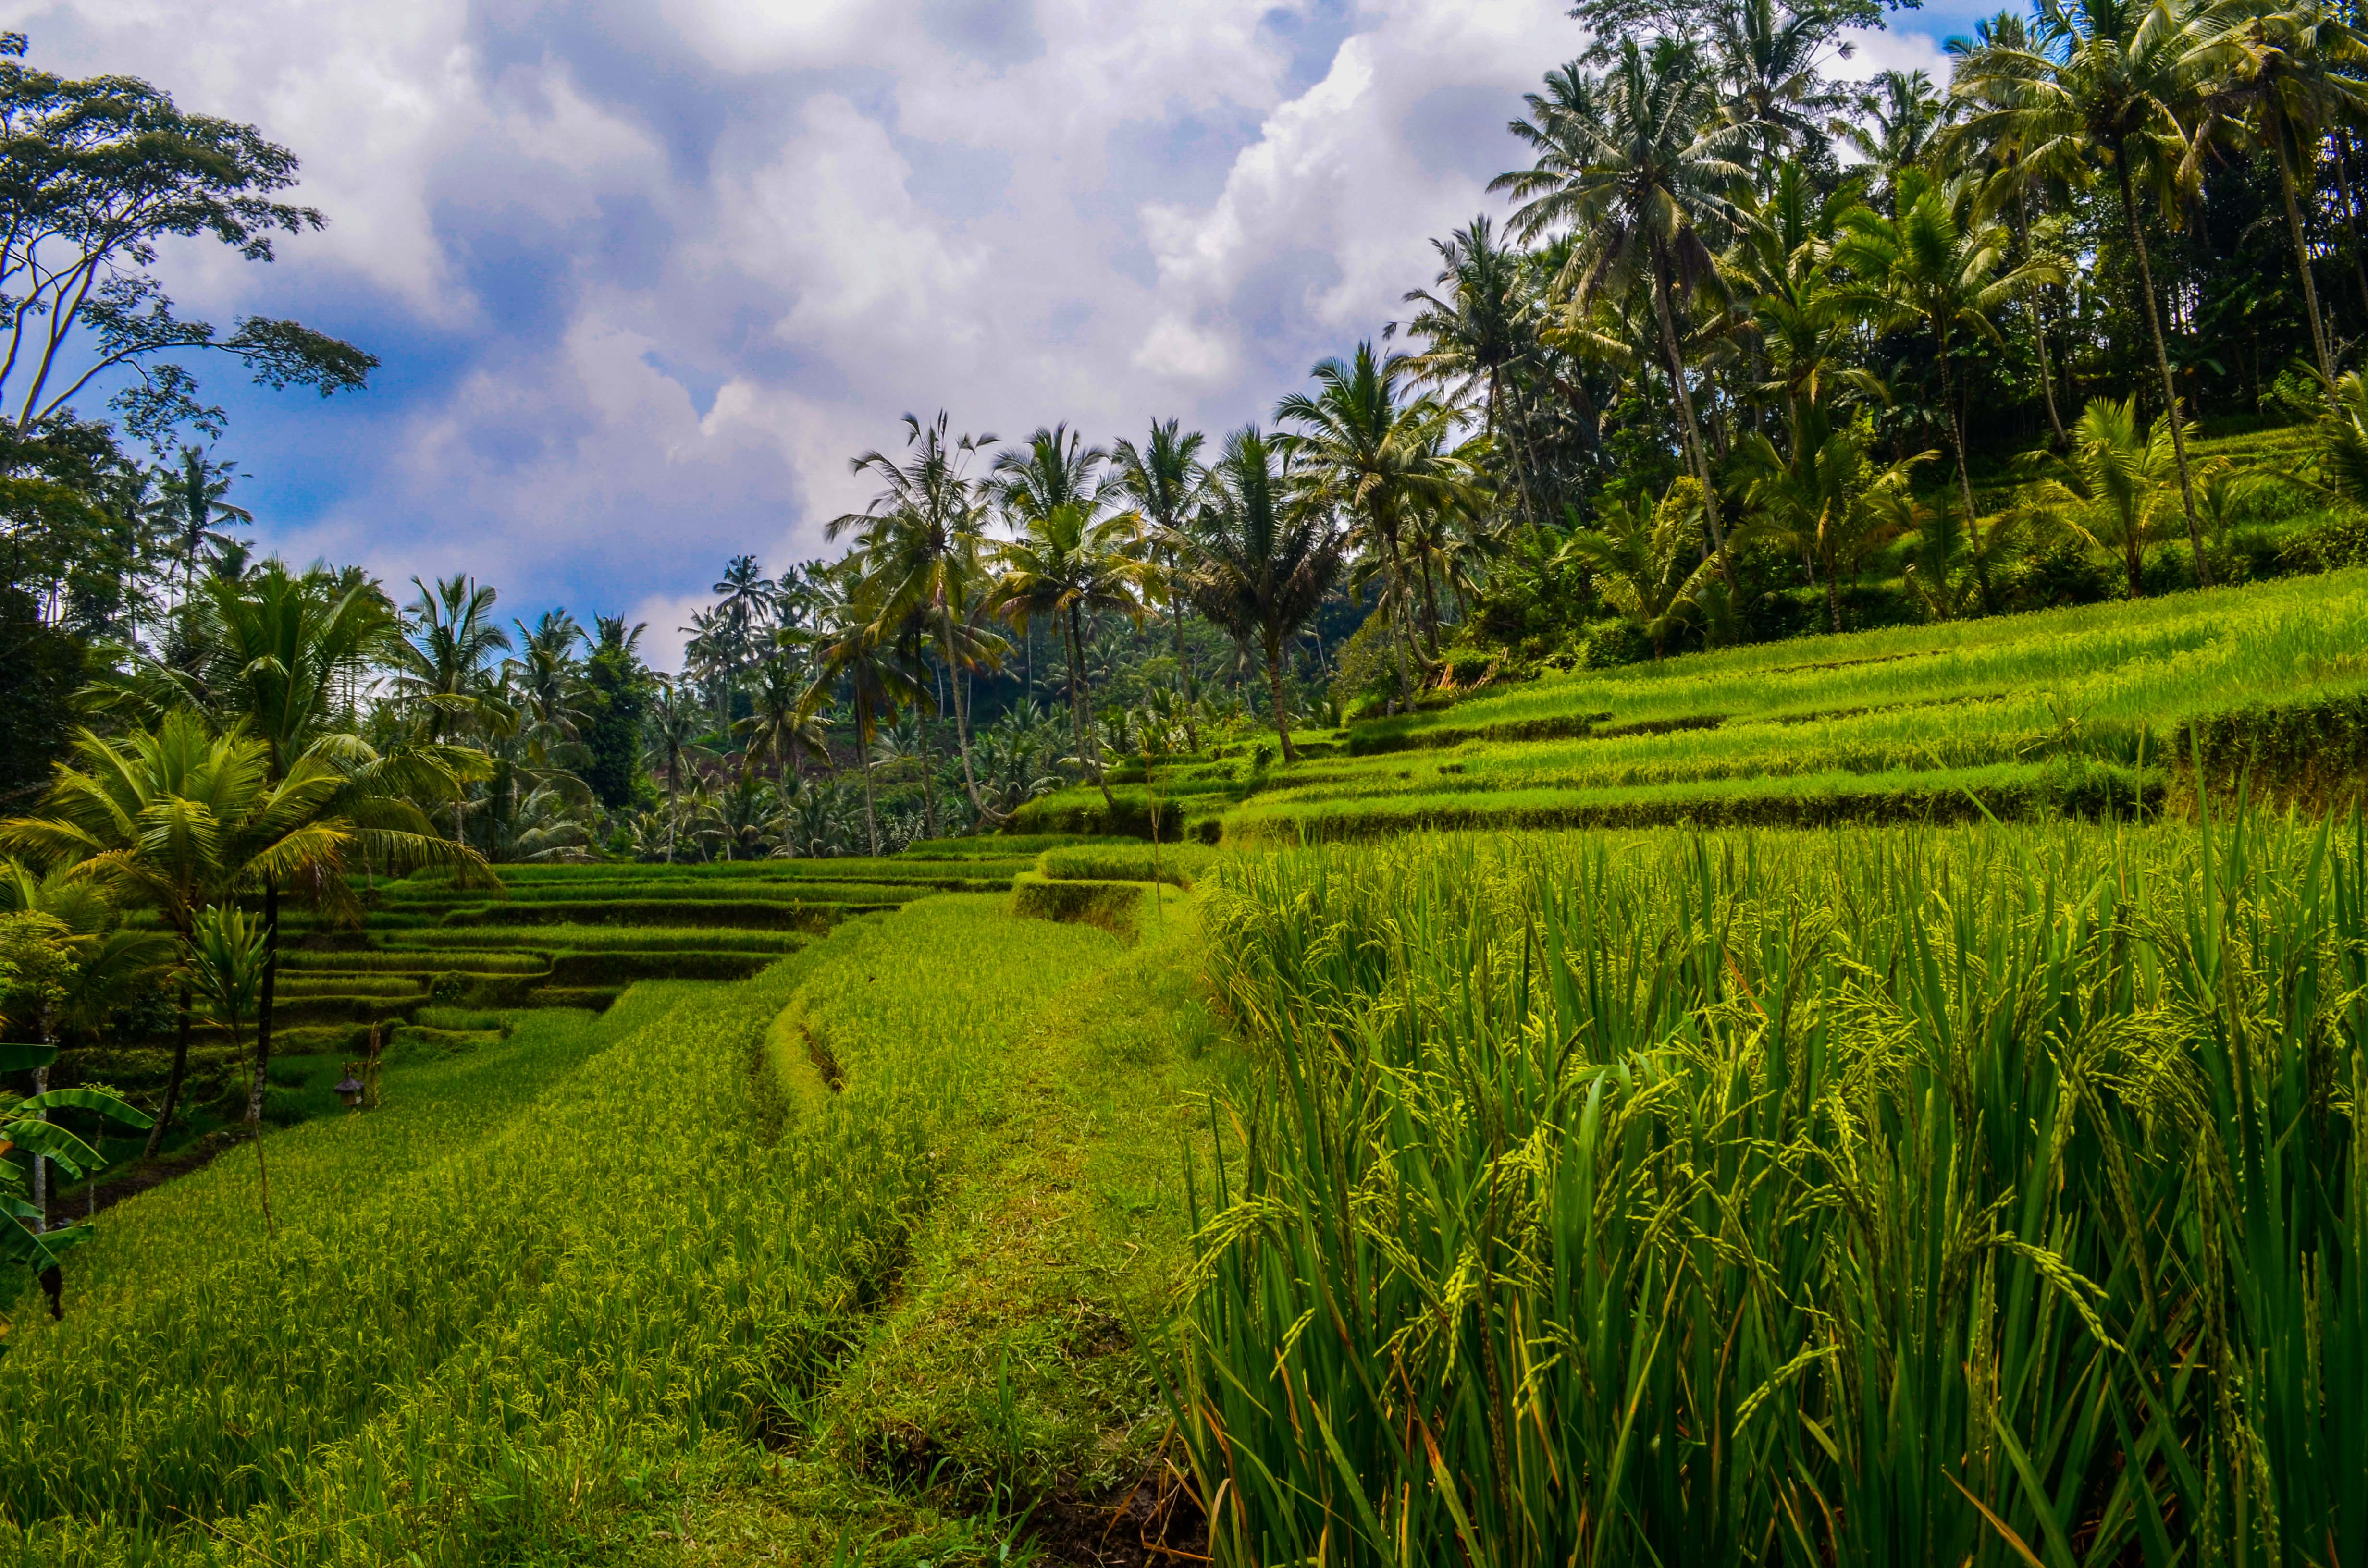 Bali photo gallery - our free photos of Bali